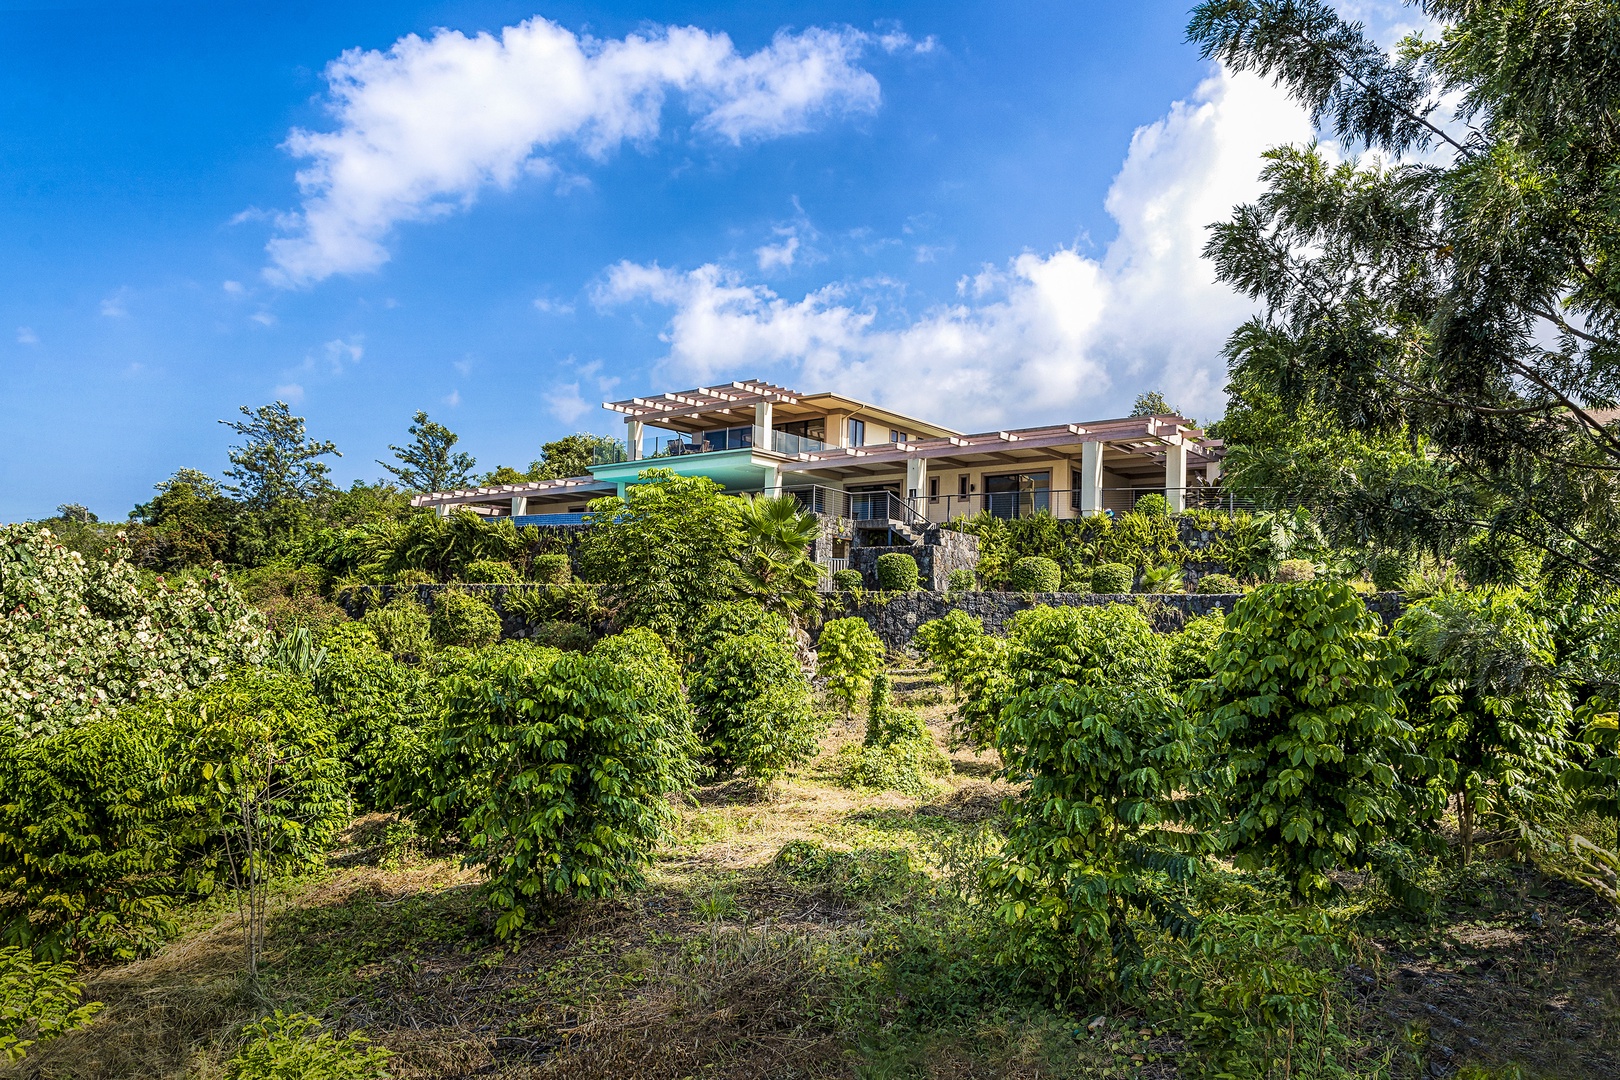 Kailua Kona Vacation Rentals, O'oma Plantation - This home sits on a 3 acre parcel, full of Coffee